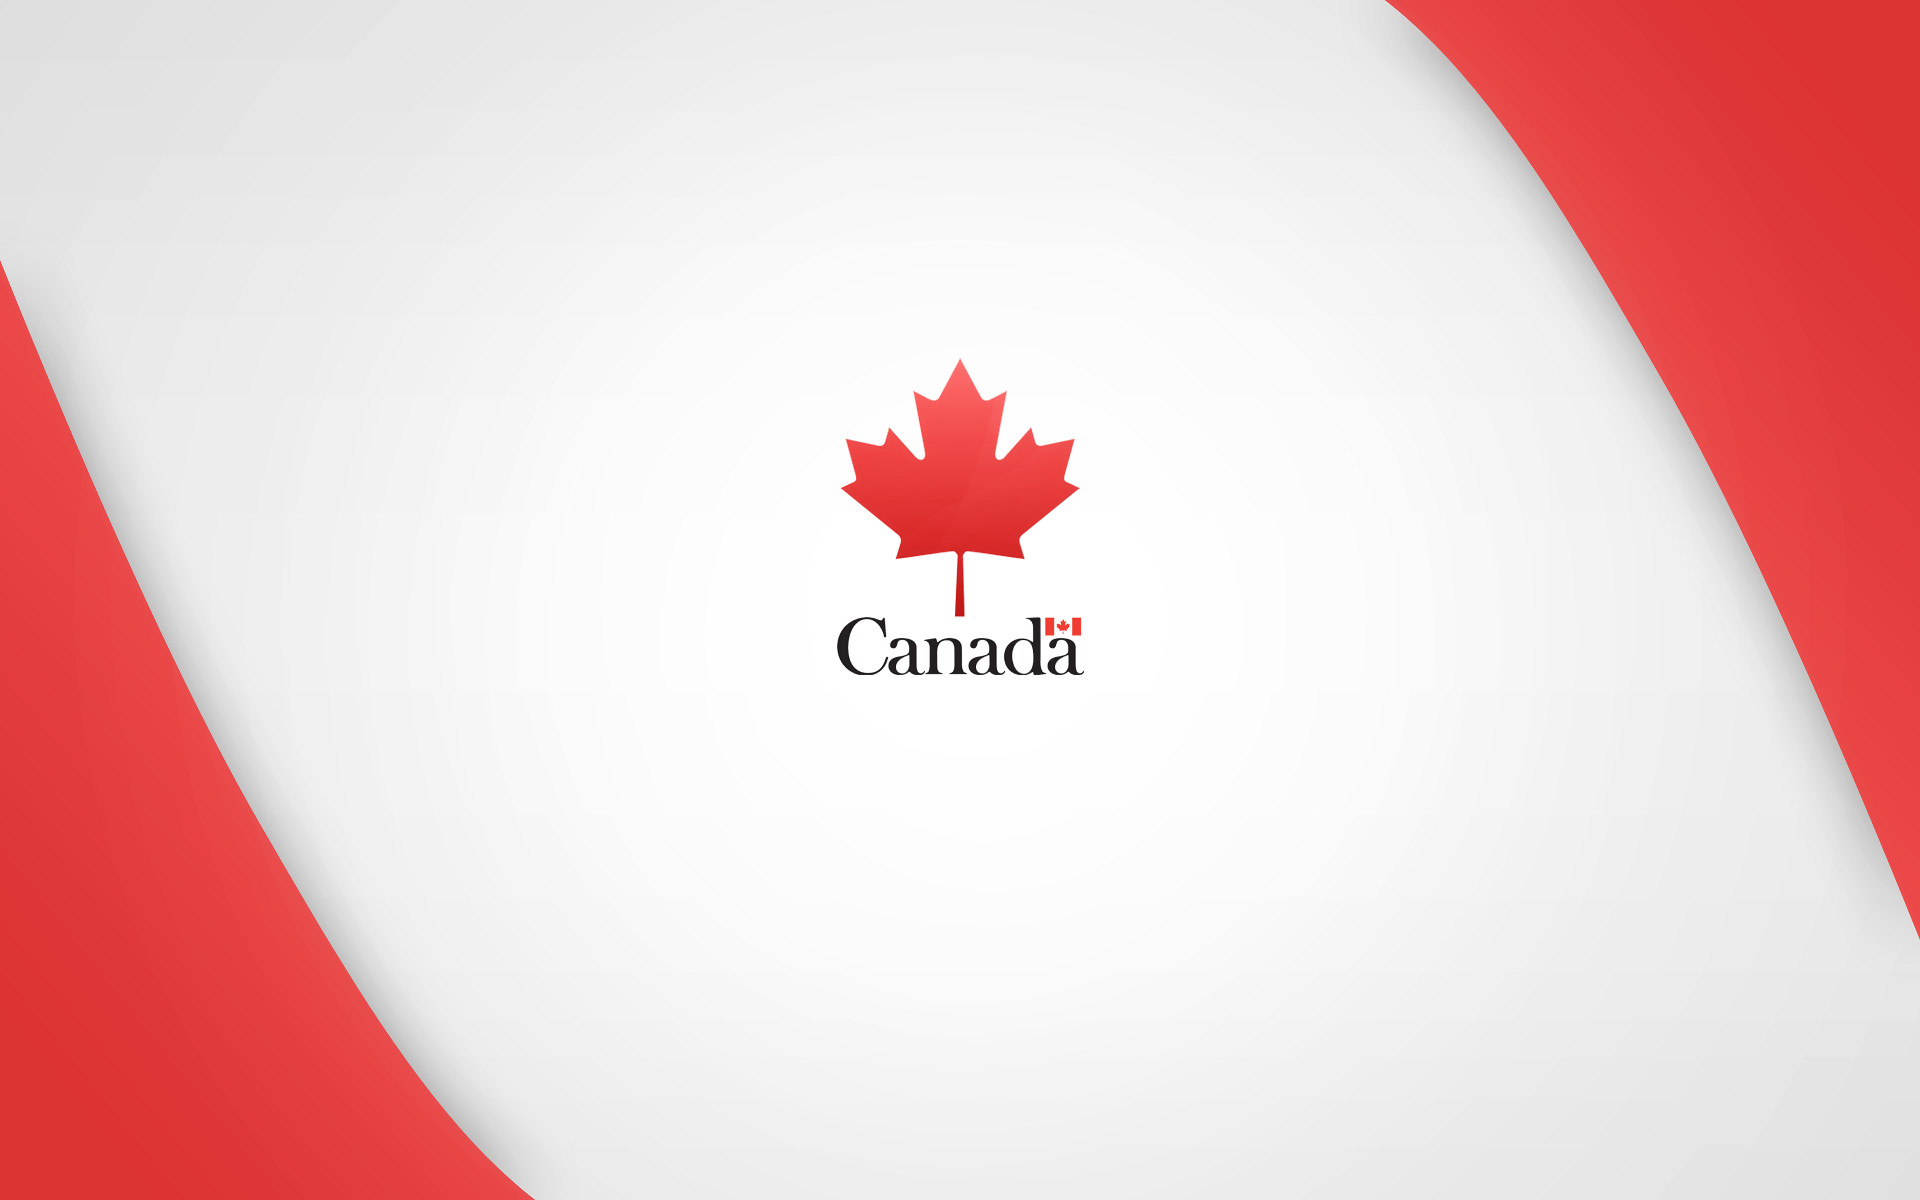 1920x1200 Canada Flag Hd Wallpapers | HD Wallpapers | Pinterest | Hd wallpaper,  Wallpaper and Free wallpaper download